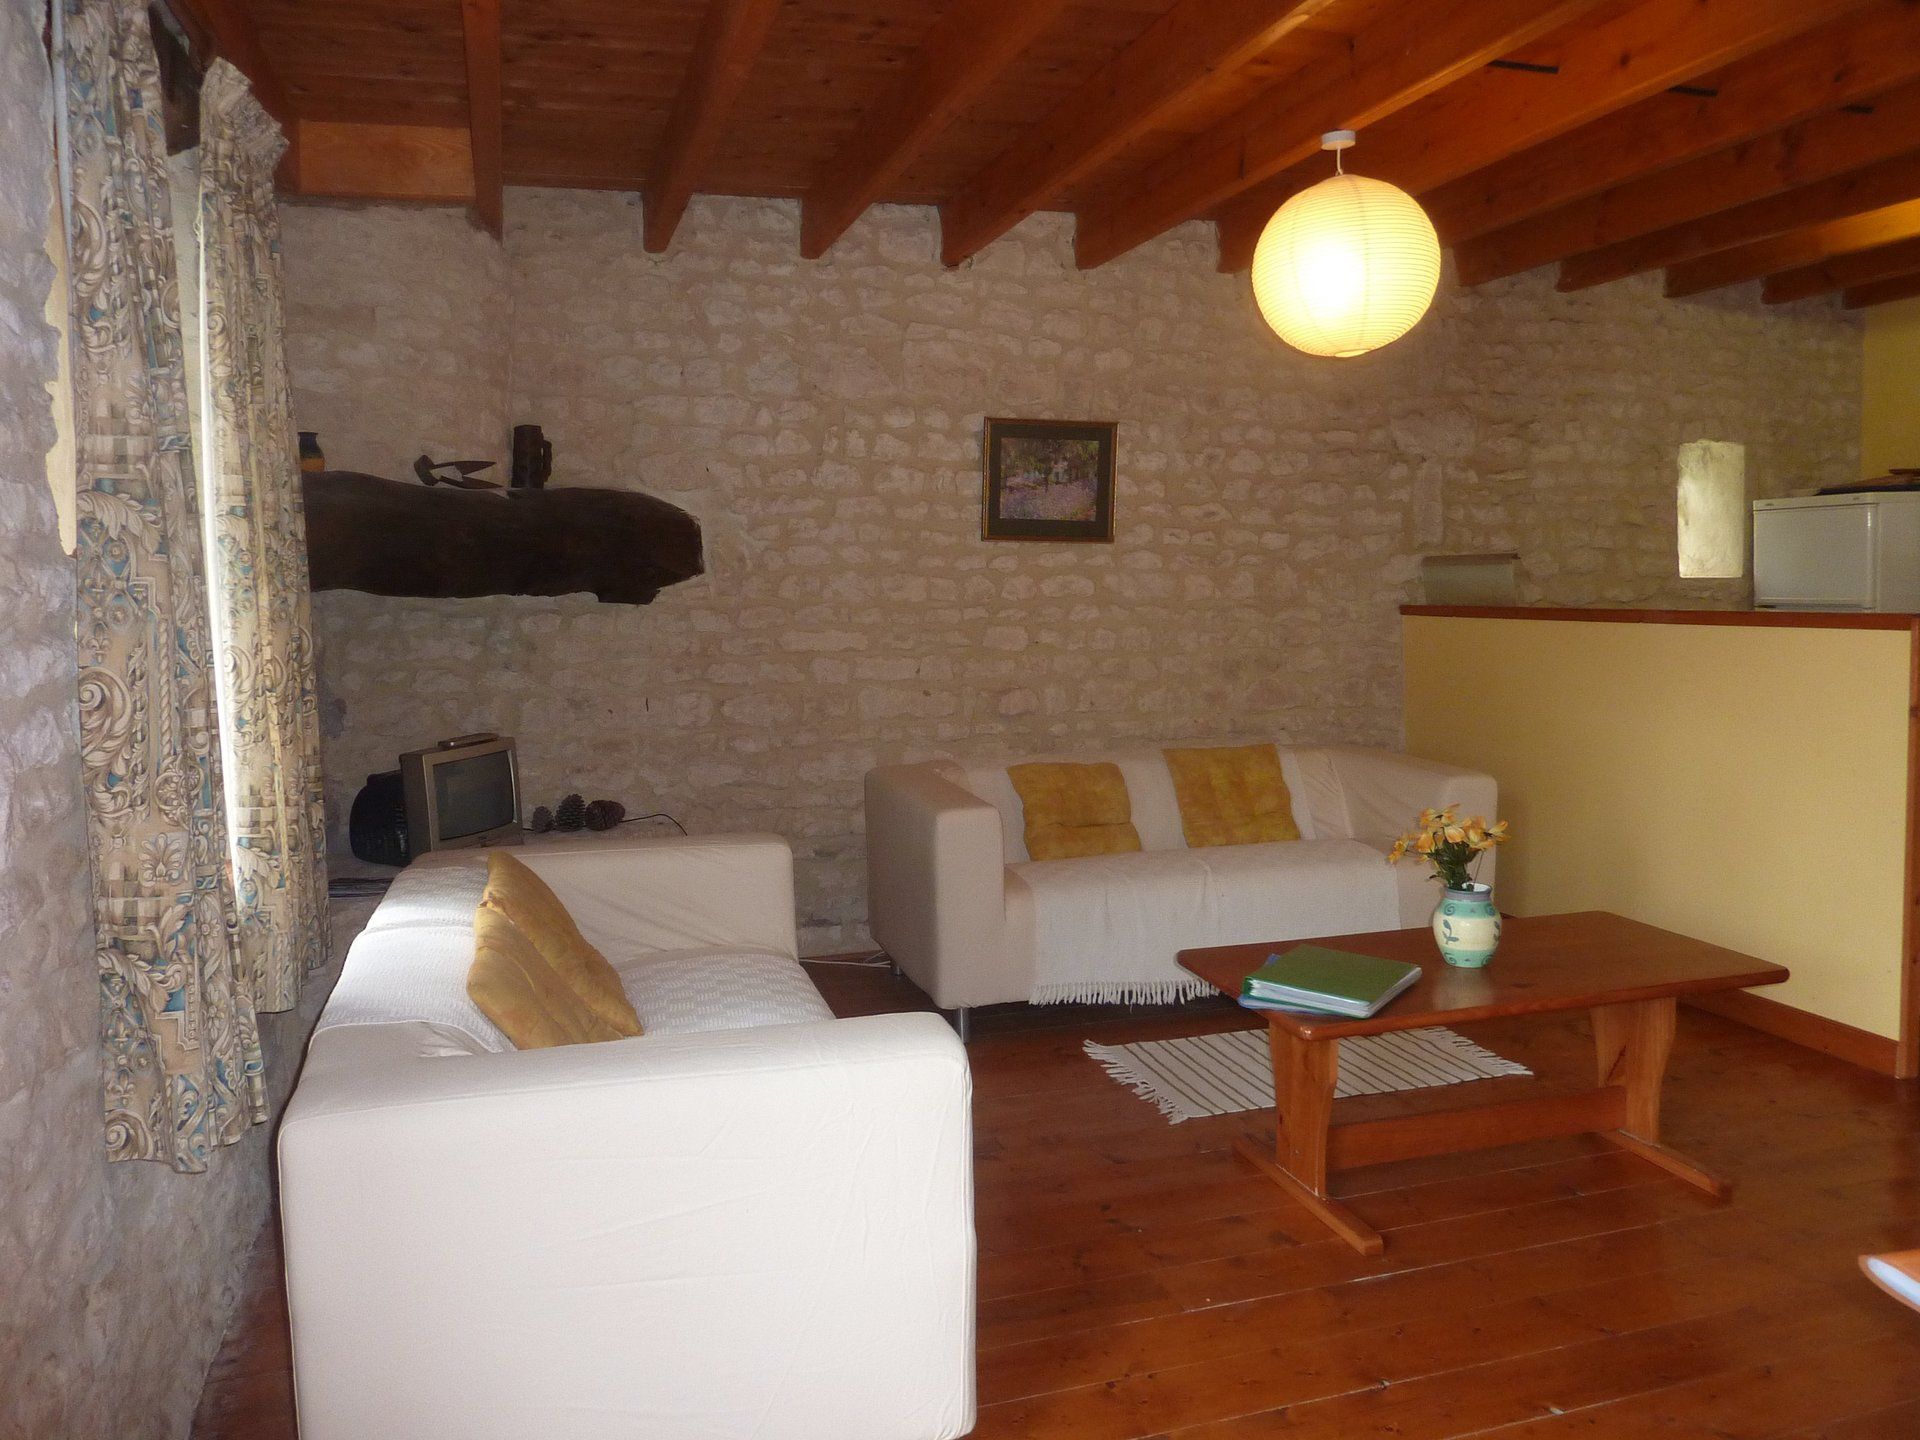 Baleine holiday cottage Les Vallaies